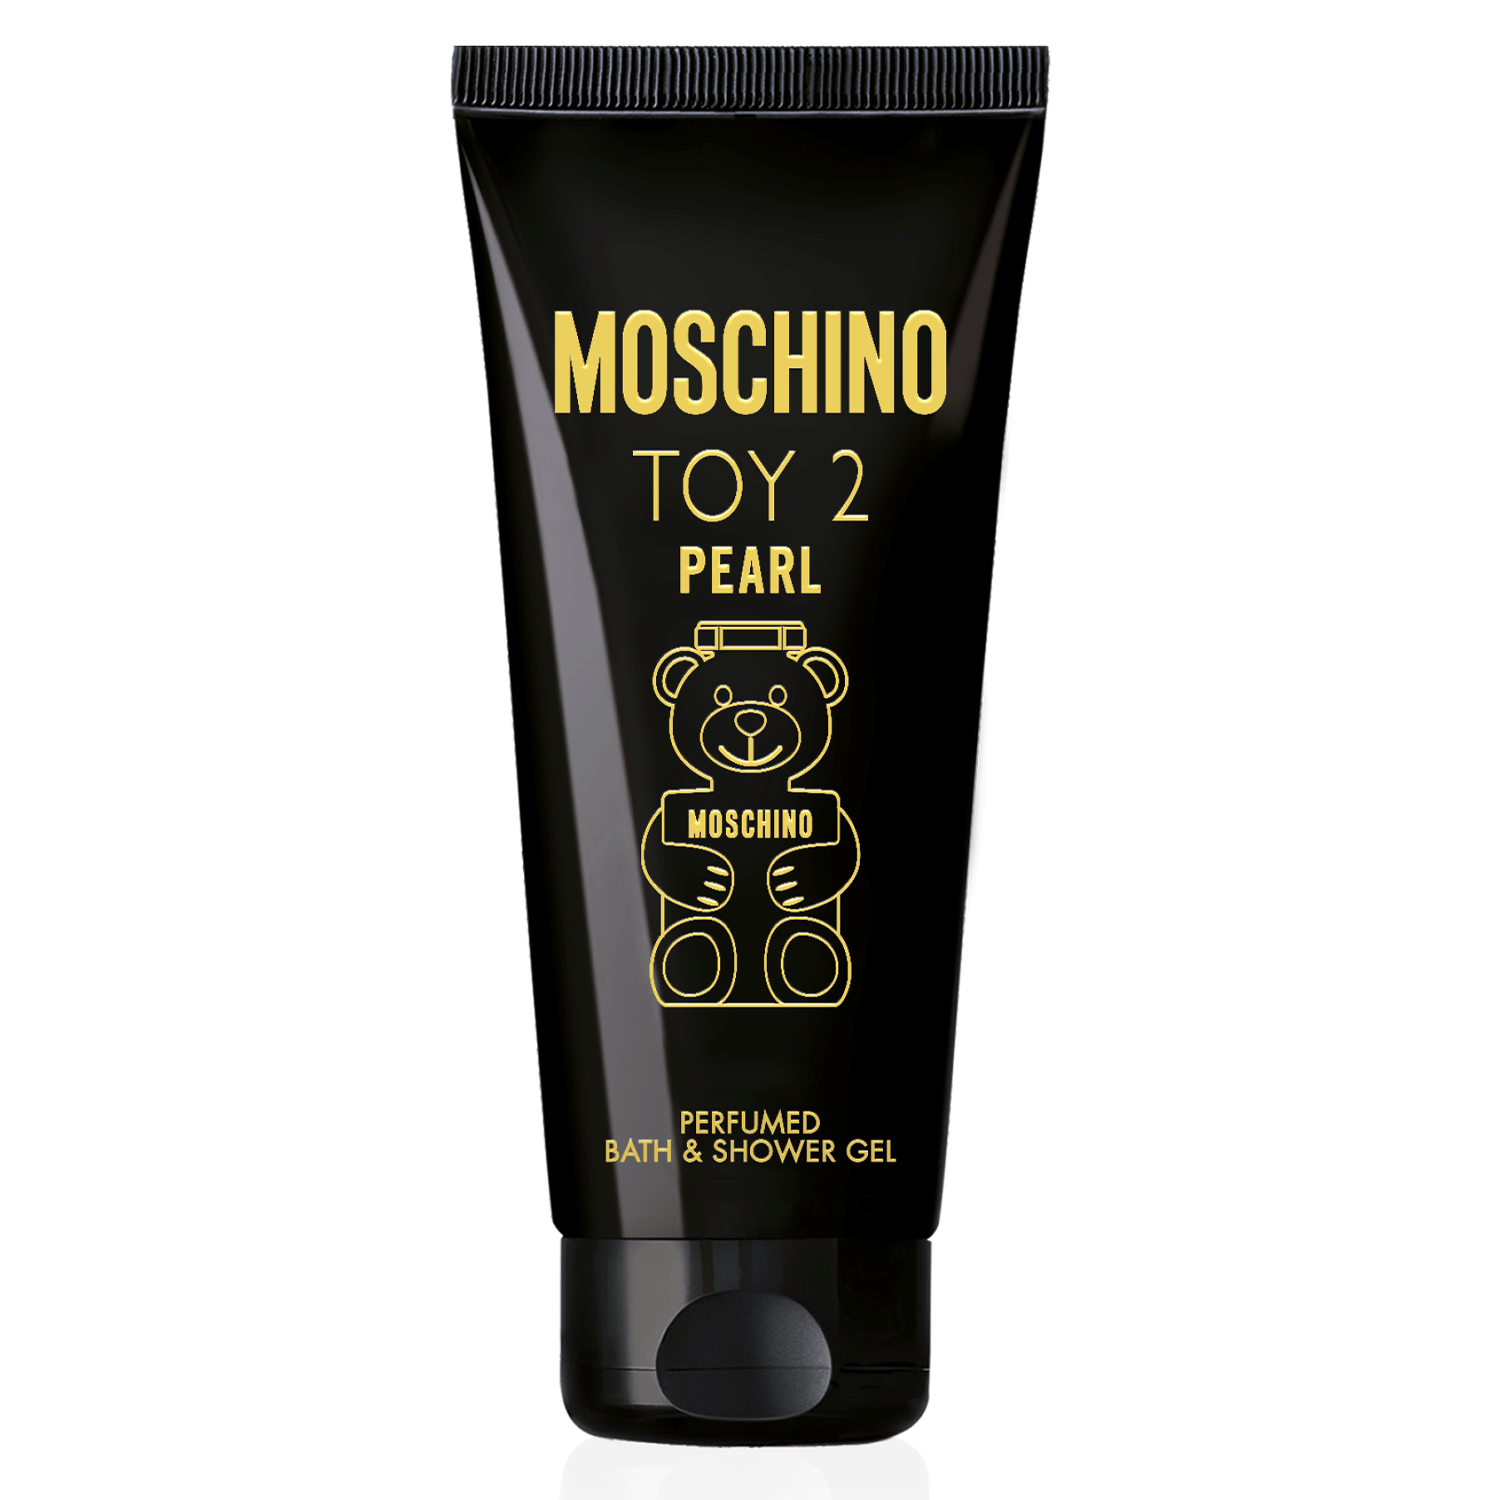 Product image from Toy2 Pearl - Perfumed Bath & Shower Gel Tube